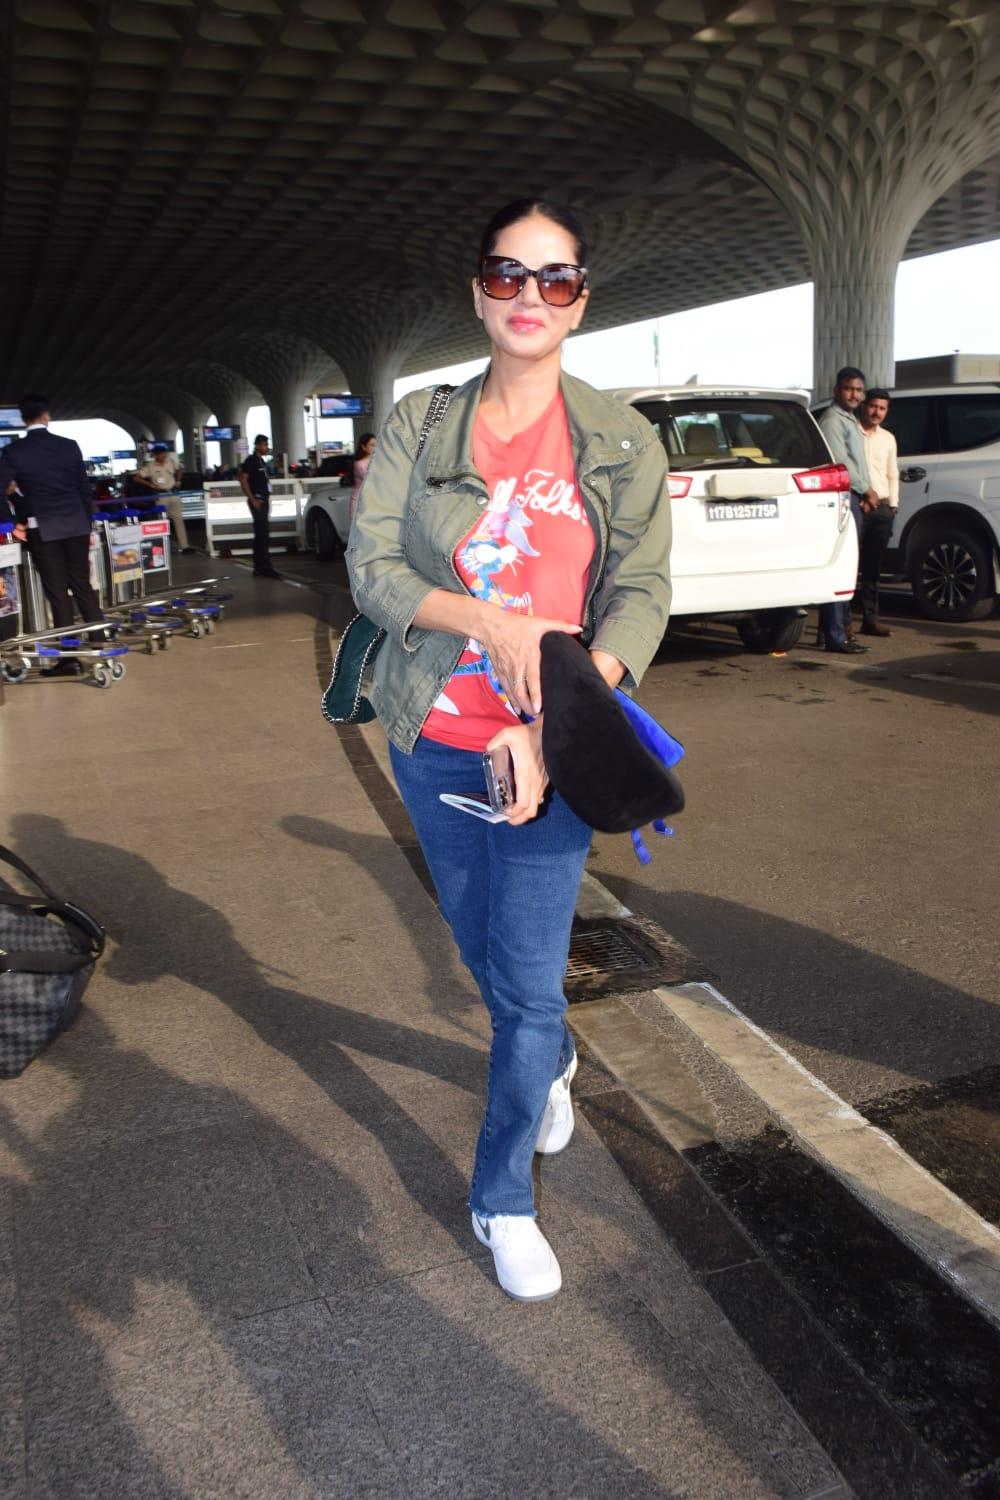 For her flight, the actress opted for comfy wear as she was photographed in jeans and T-shirt